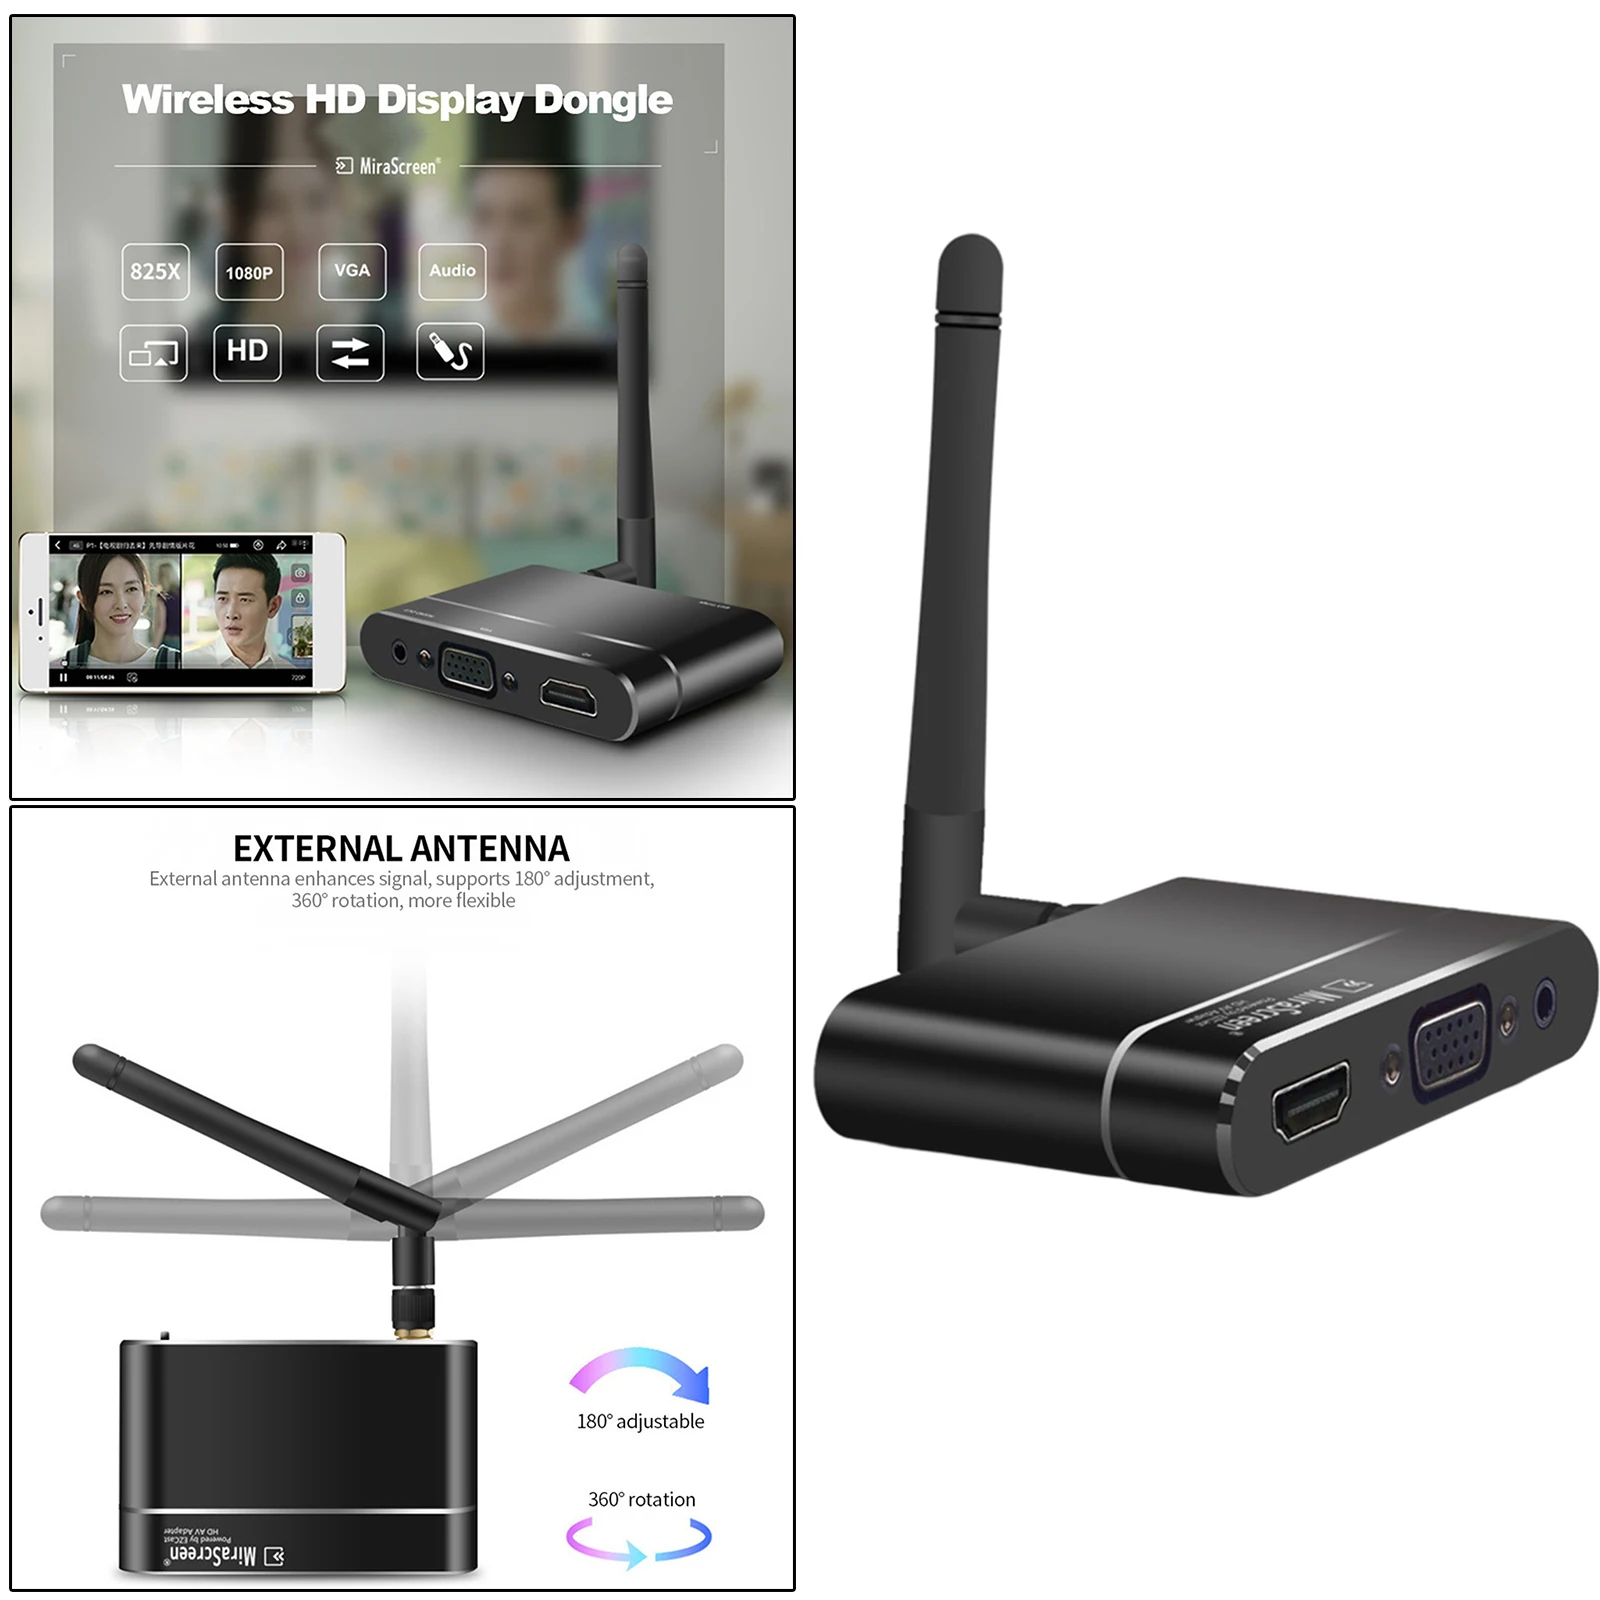 Wireless WiFi Display Adapter Receiver Screen Share for Casting Phone to Projector Car Screen